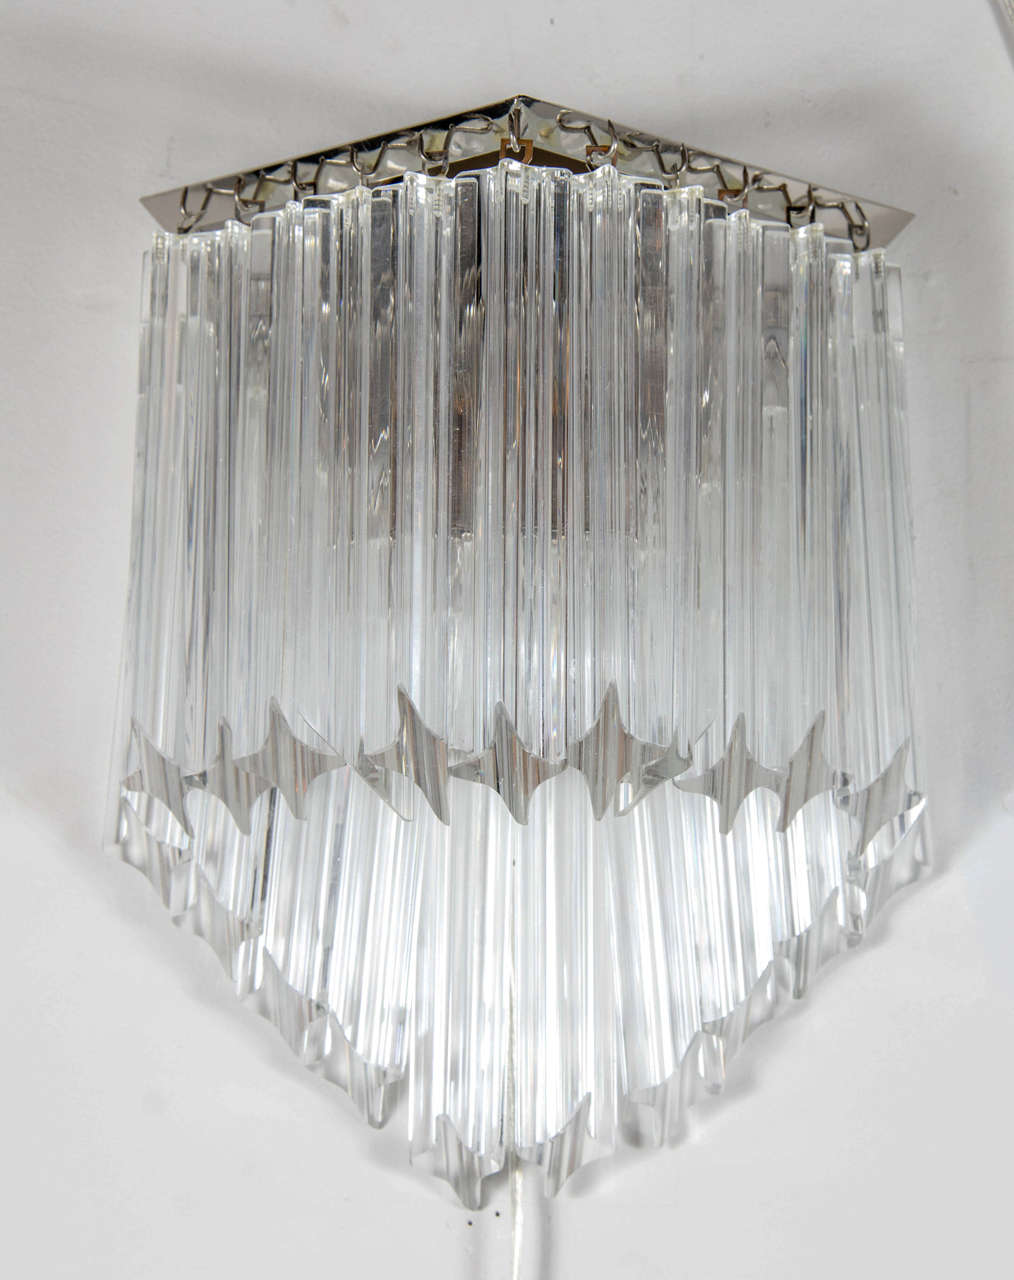 Pair of Mid-Century Modernist Triedre cut-crystal Camer sconces. This pair of sconces is comprised of individually hung Camer Triedre cut-crystal rods, descending from top to bottom, in a stylized angular formation. The sconces extend from a round